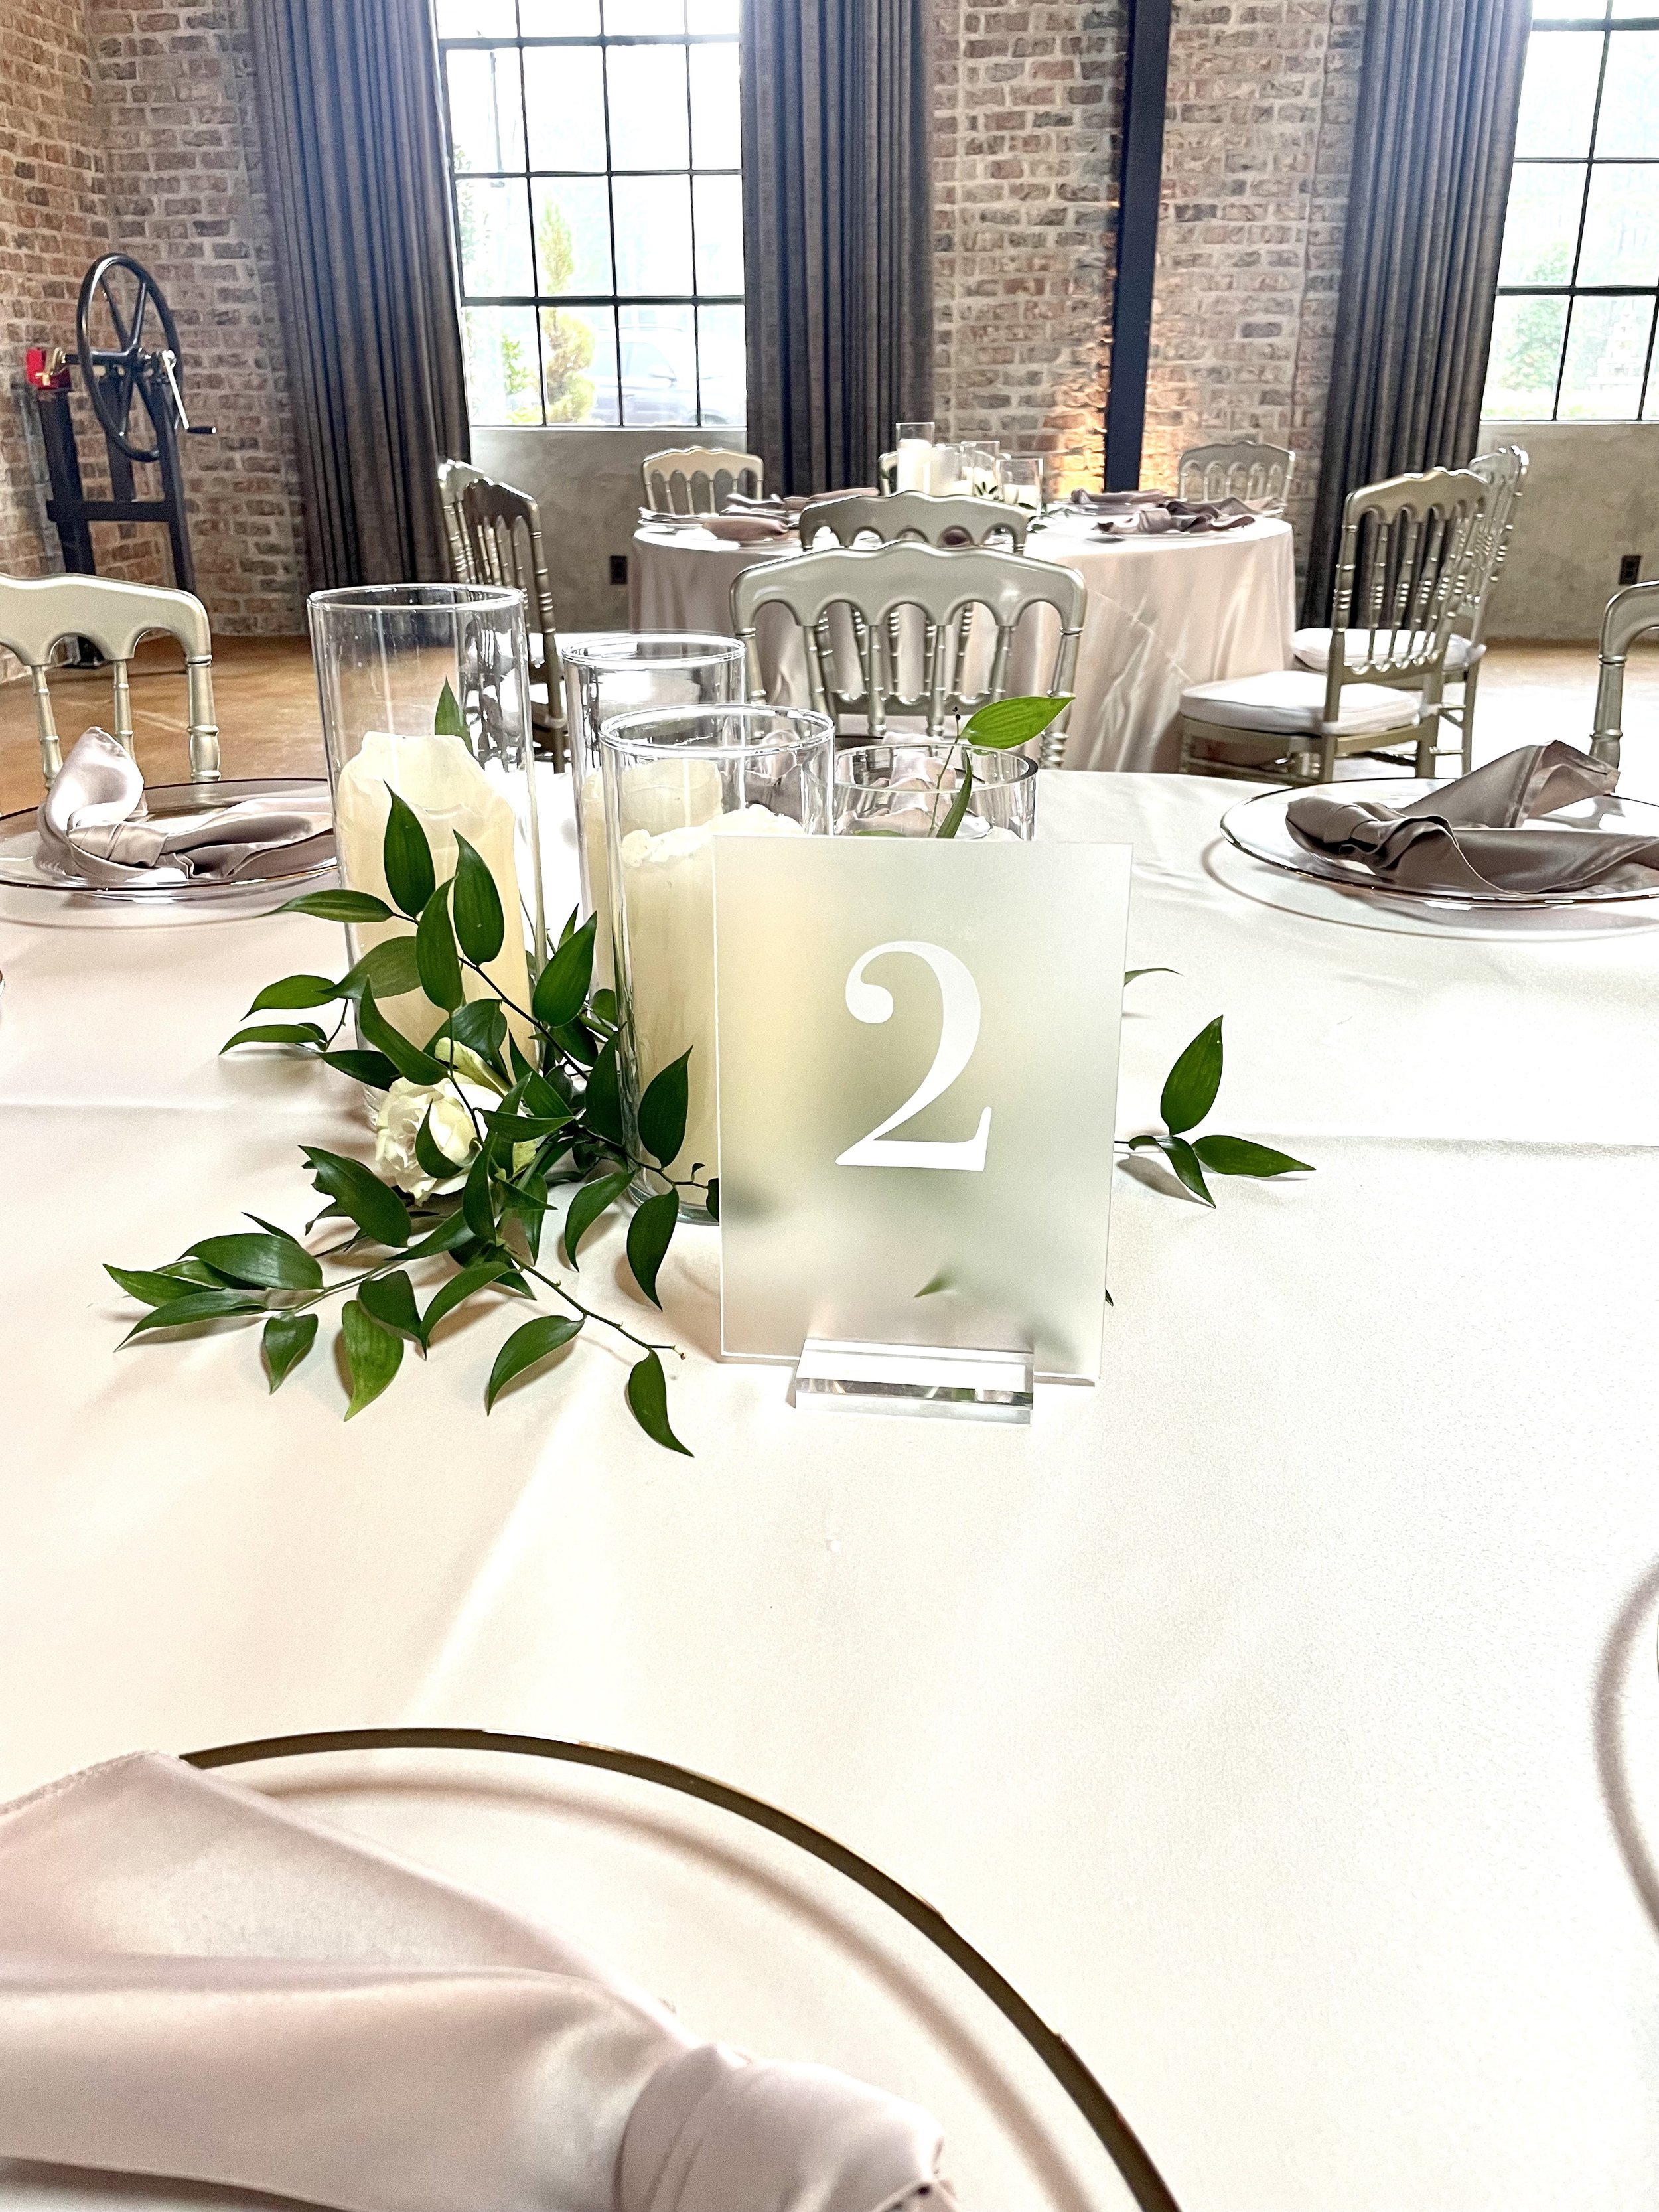 5x7 frosted acrylic table numbers